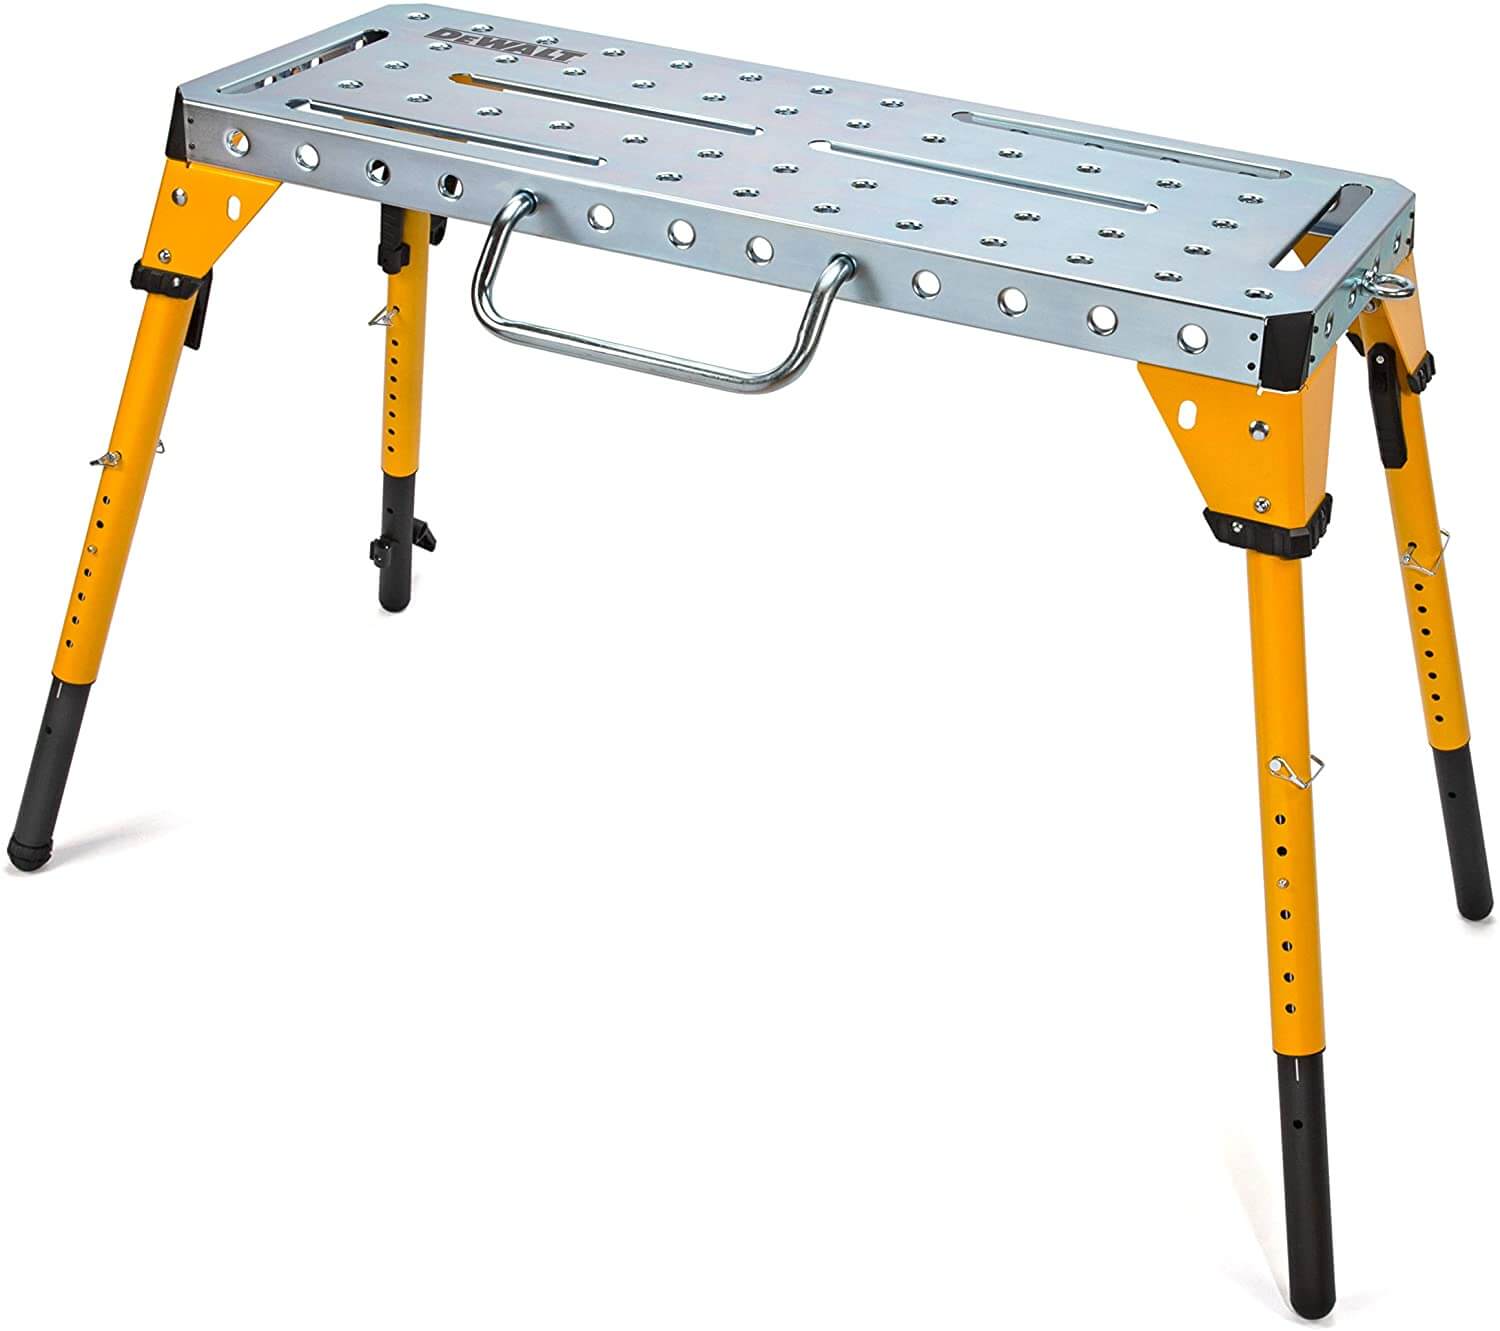 welding table for the shop. click image to buy now.